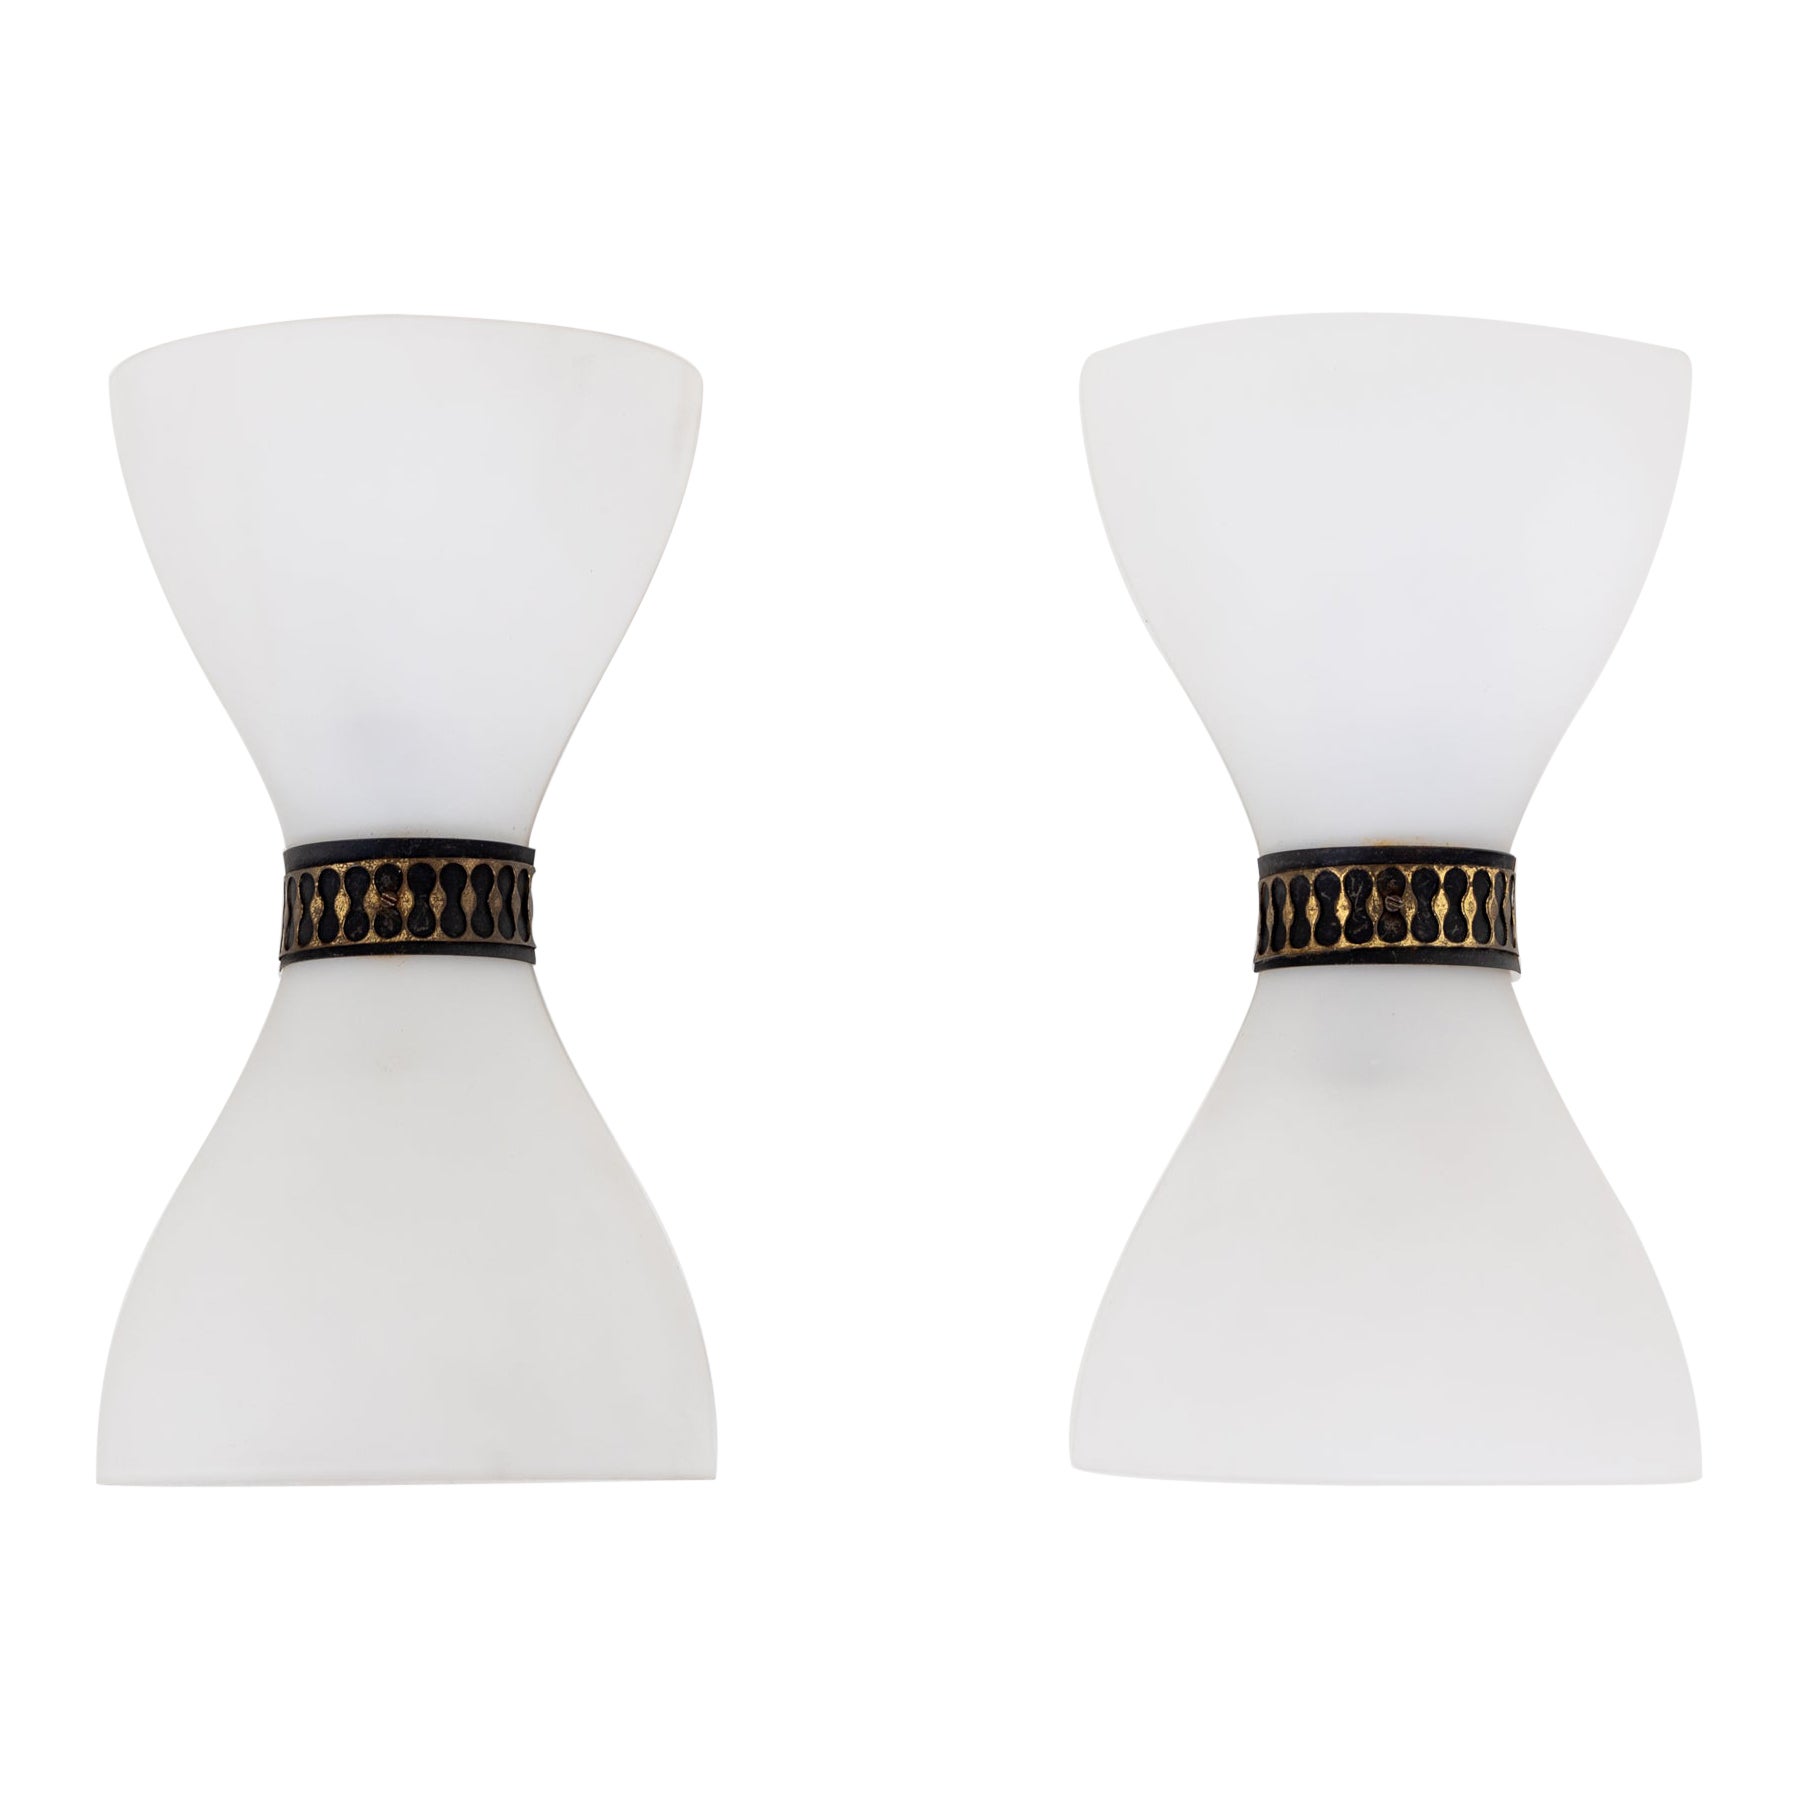 Pair of Bow-Tie Wall Lamps, Opaque Glass, Italian Manufactory, Mid-20th Century For Sale